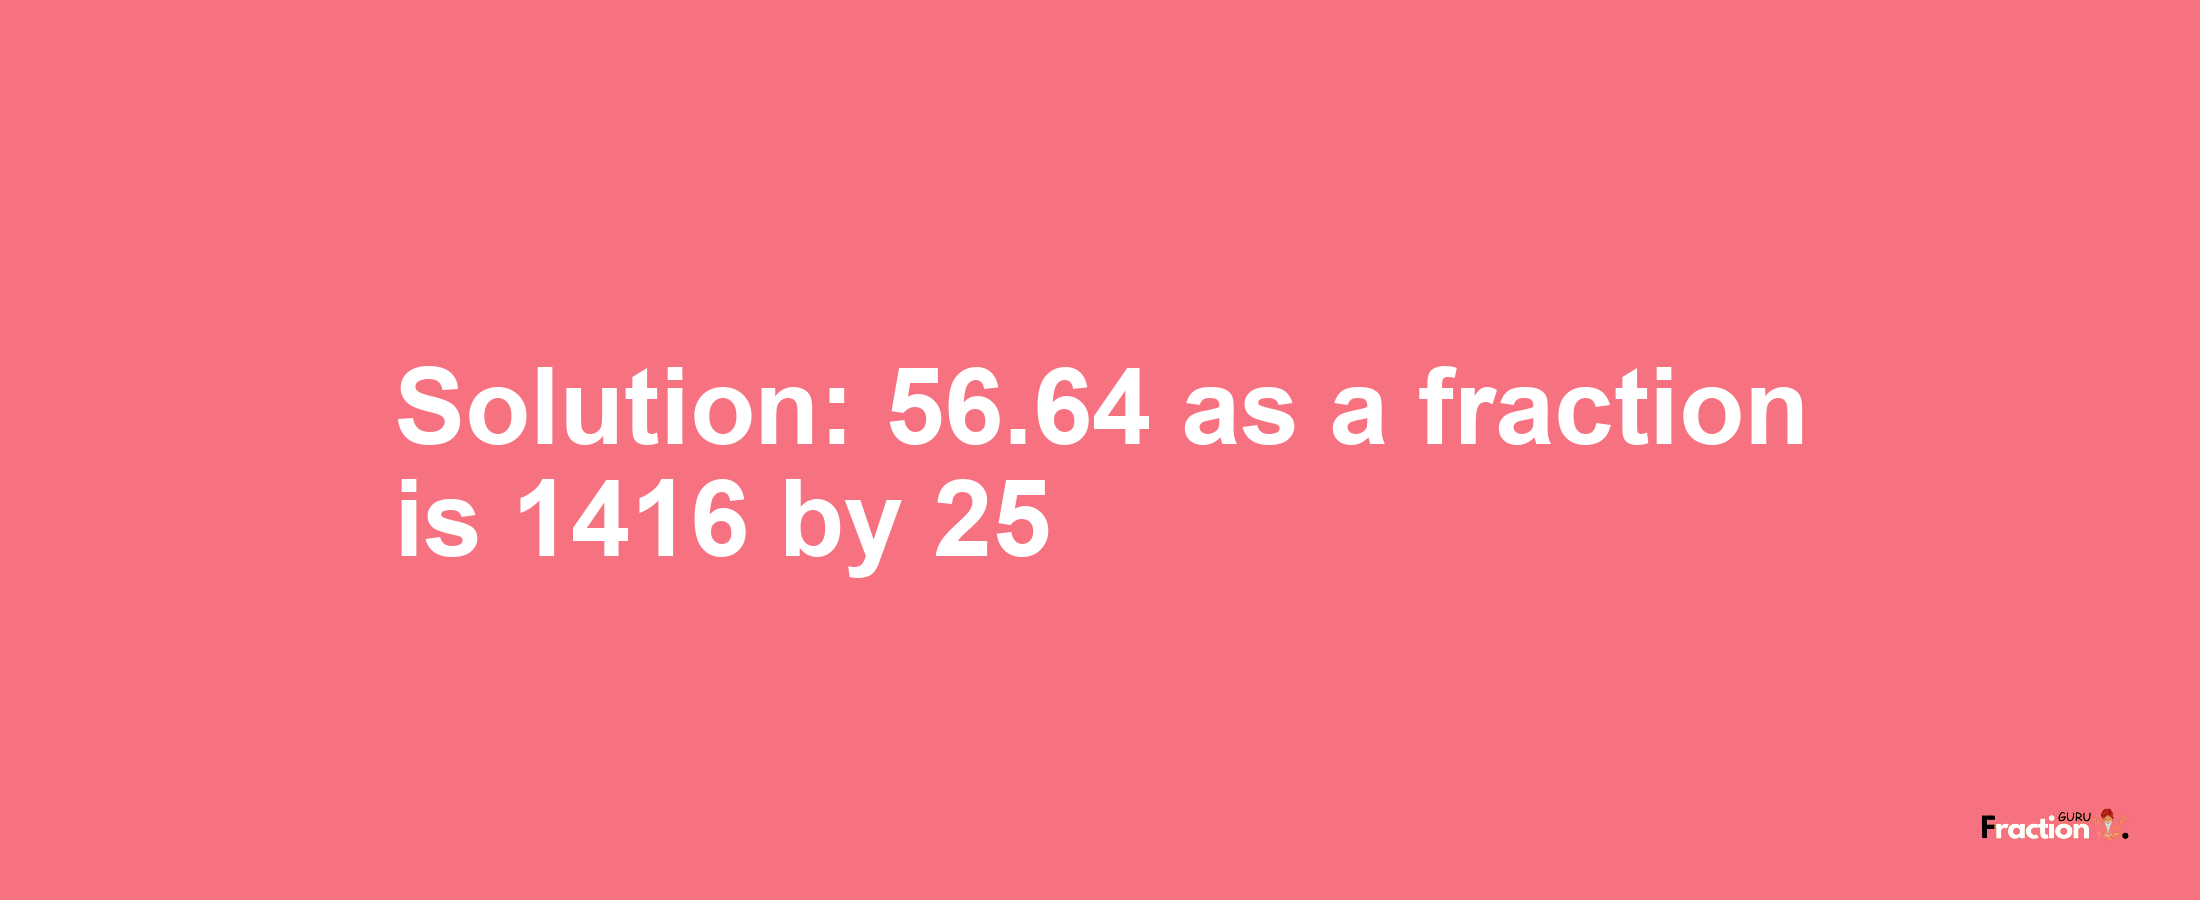 Solution:56.64 as a fraction is 1416/25